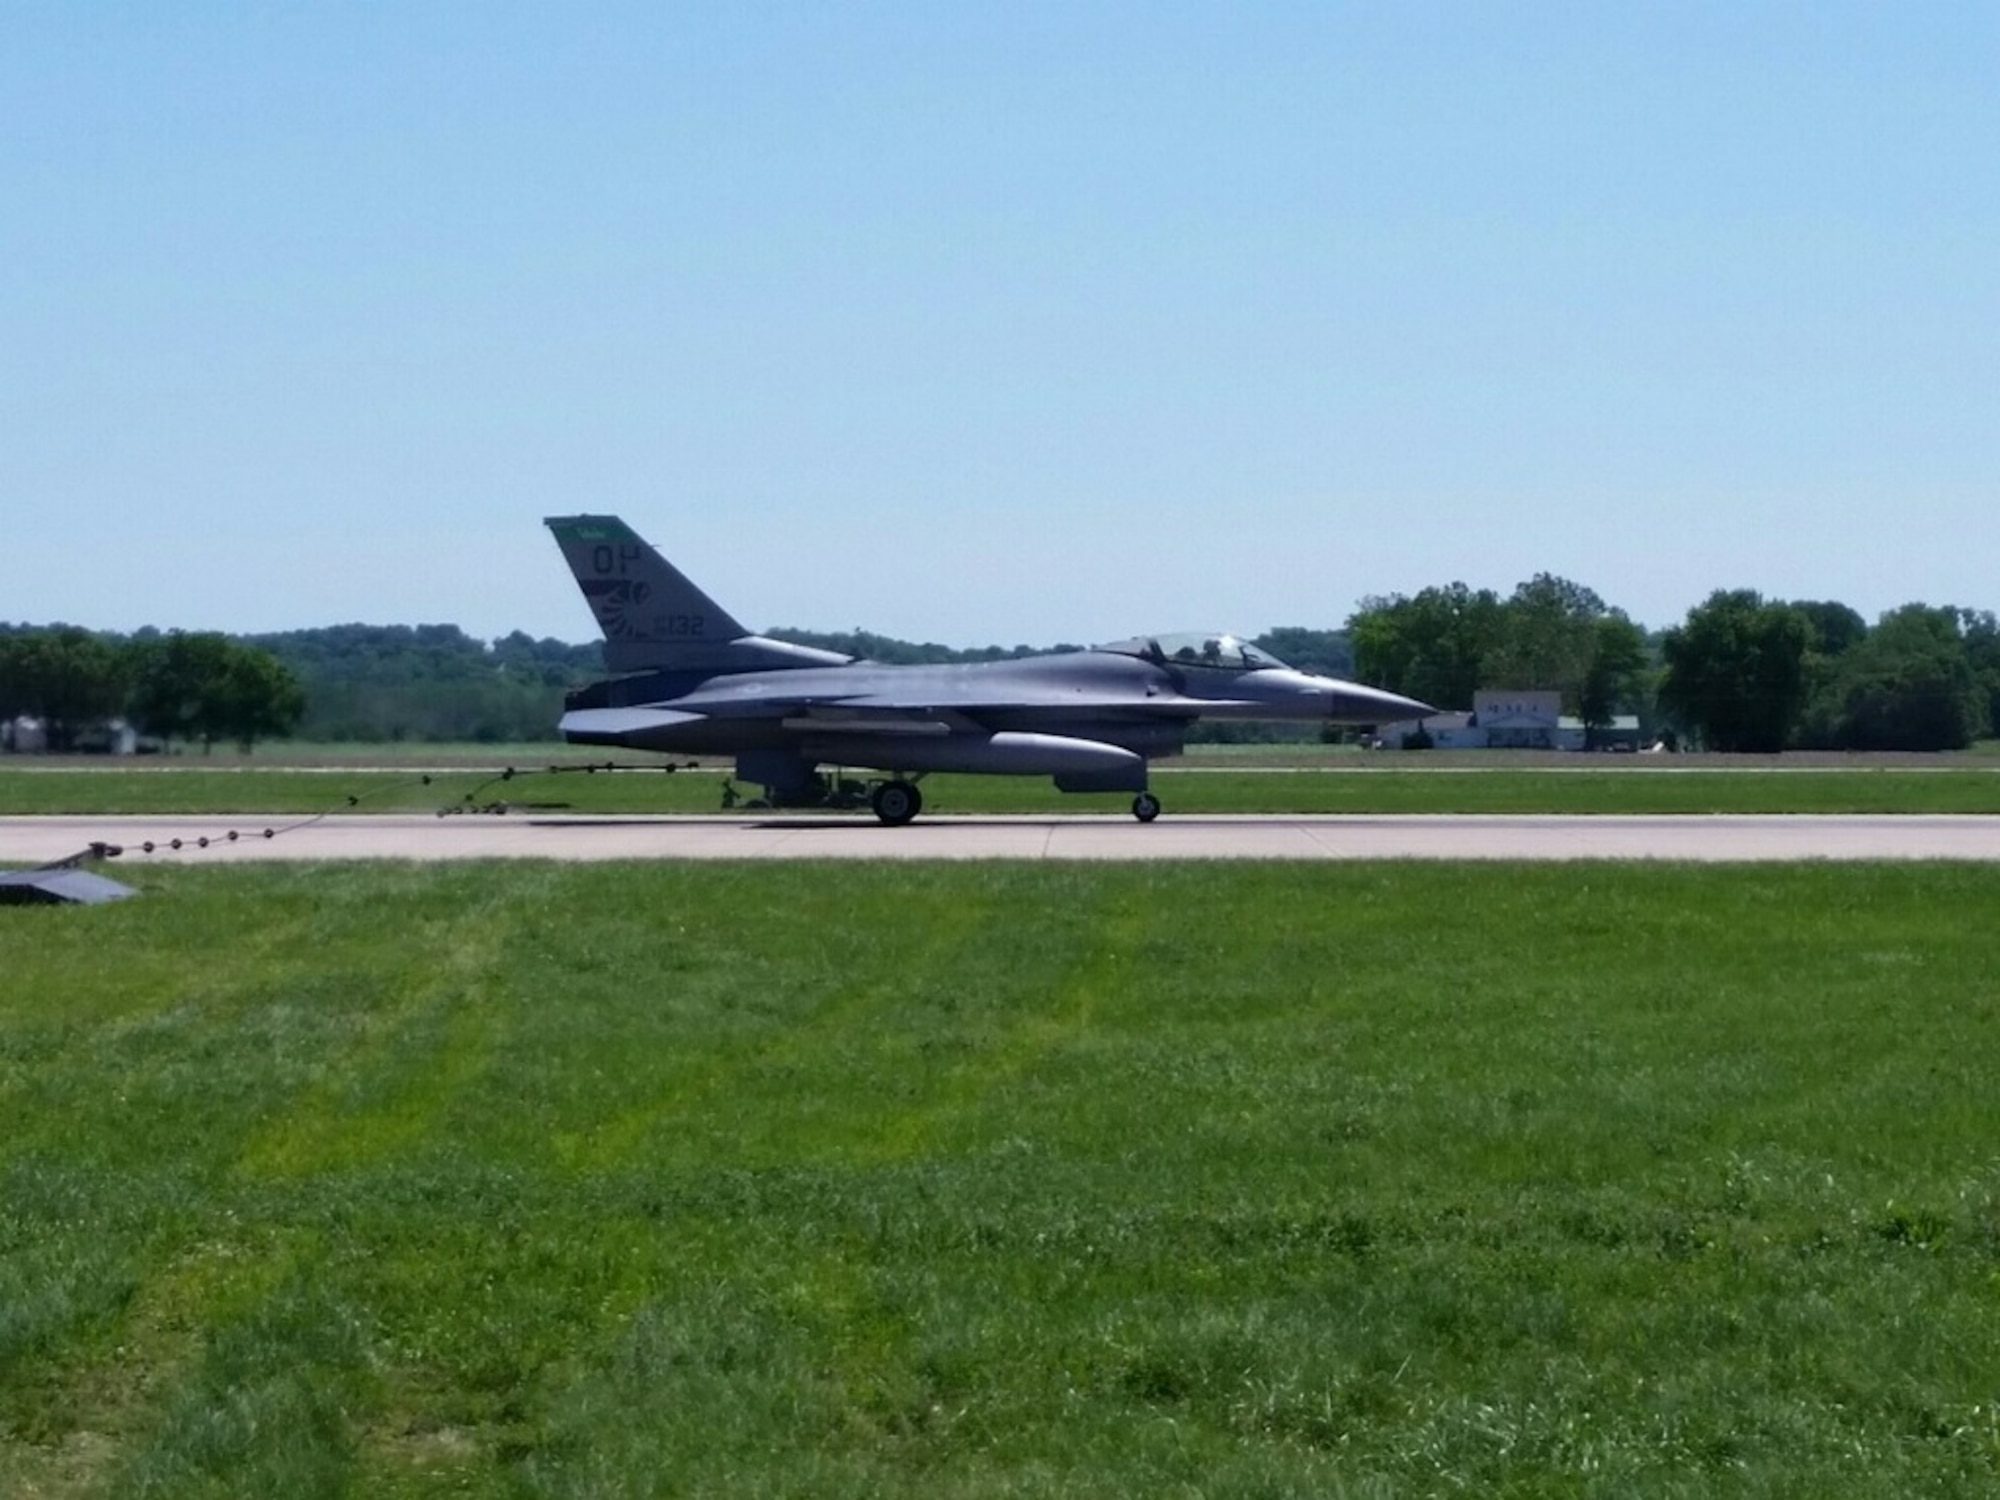 An F-16 Fighting Falcon from the 180th Fighter Wing, Ohio Air National Guard, sits on the runway at Rosecrans Air National Guard Base, St. Joseph, Mo., June 8, 2015. The aircraft was used to test and certify the use of a mobile aircraft arresting system, or MAAS, on the runway. The temporary MAAS will be deployed at Rosecrans during the Wings Over Whiteman Airshow at Whiteman Air Force Base as a backup for the U.S. Air Force Thunderbirds if they need to make an emergency arrestment landing. (U.S. Air Force photo by Staff Sgt. Alexander Toro)